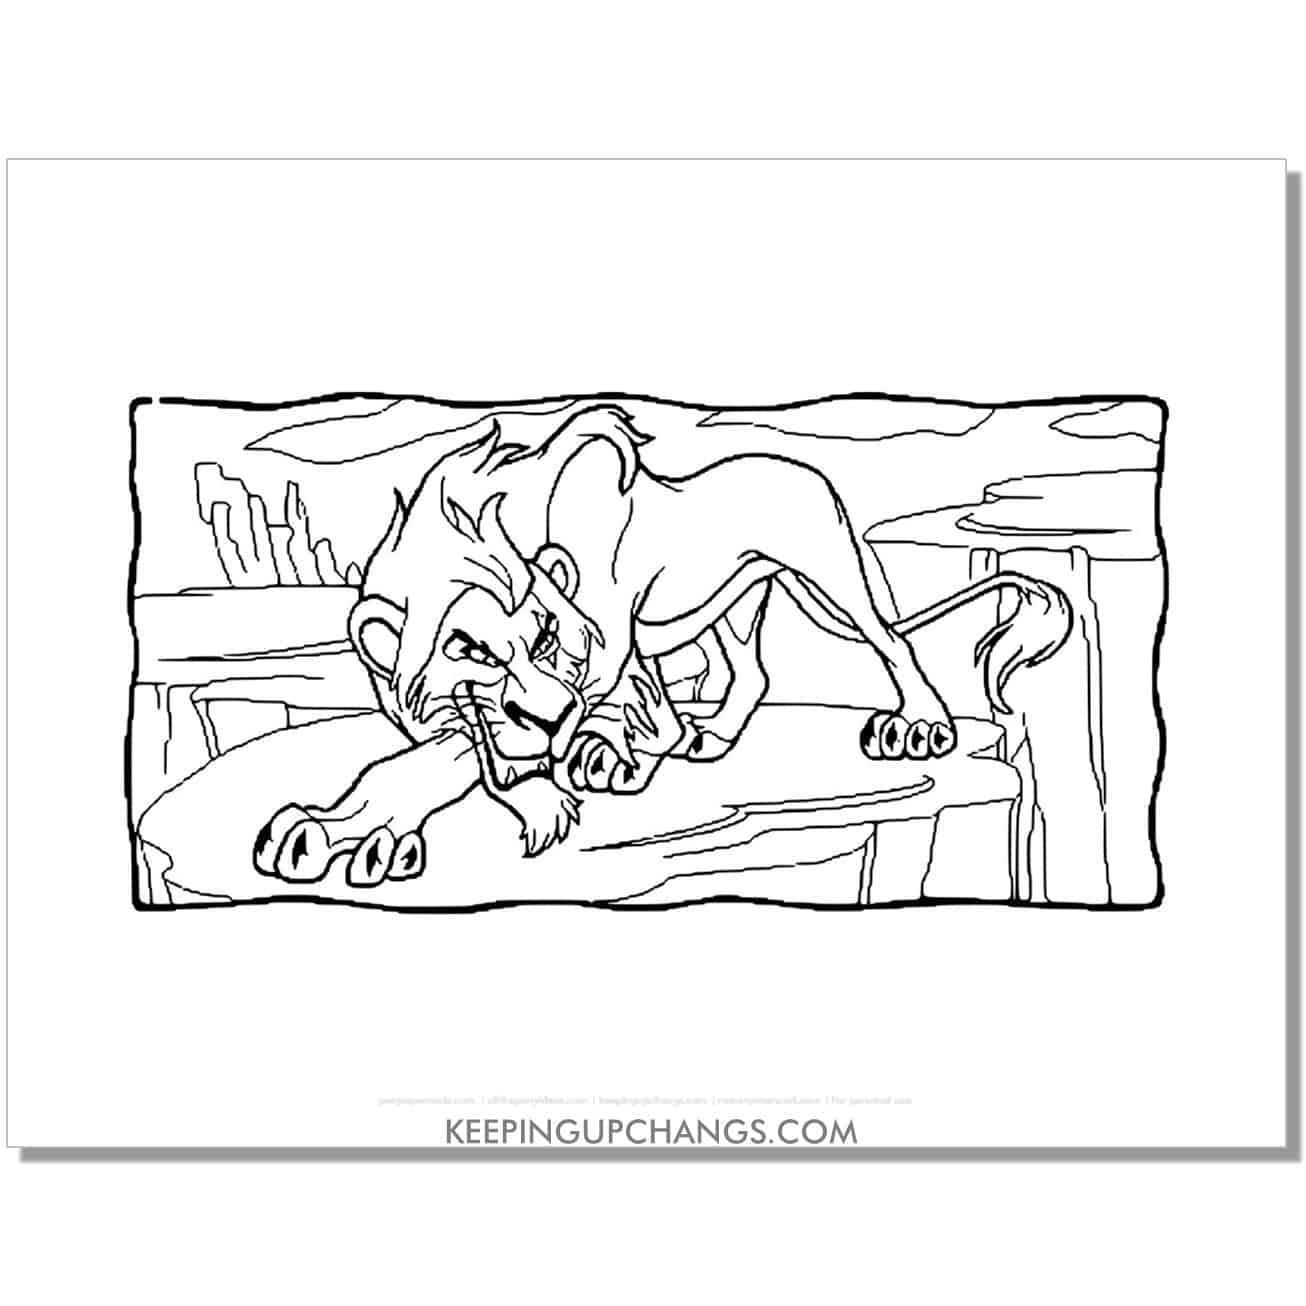 uncle scar with evil look lion king coloring page, sheet.